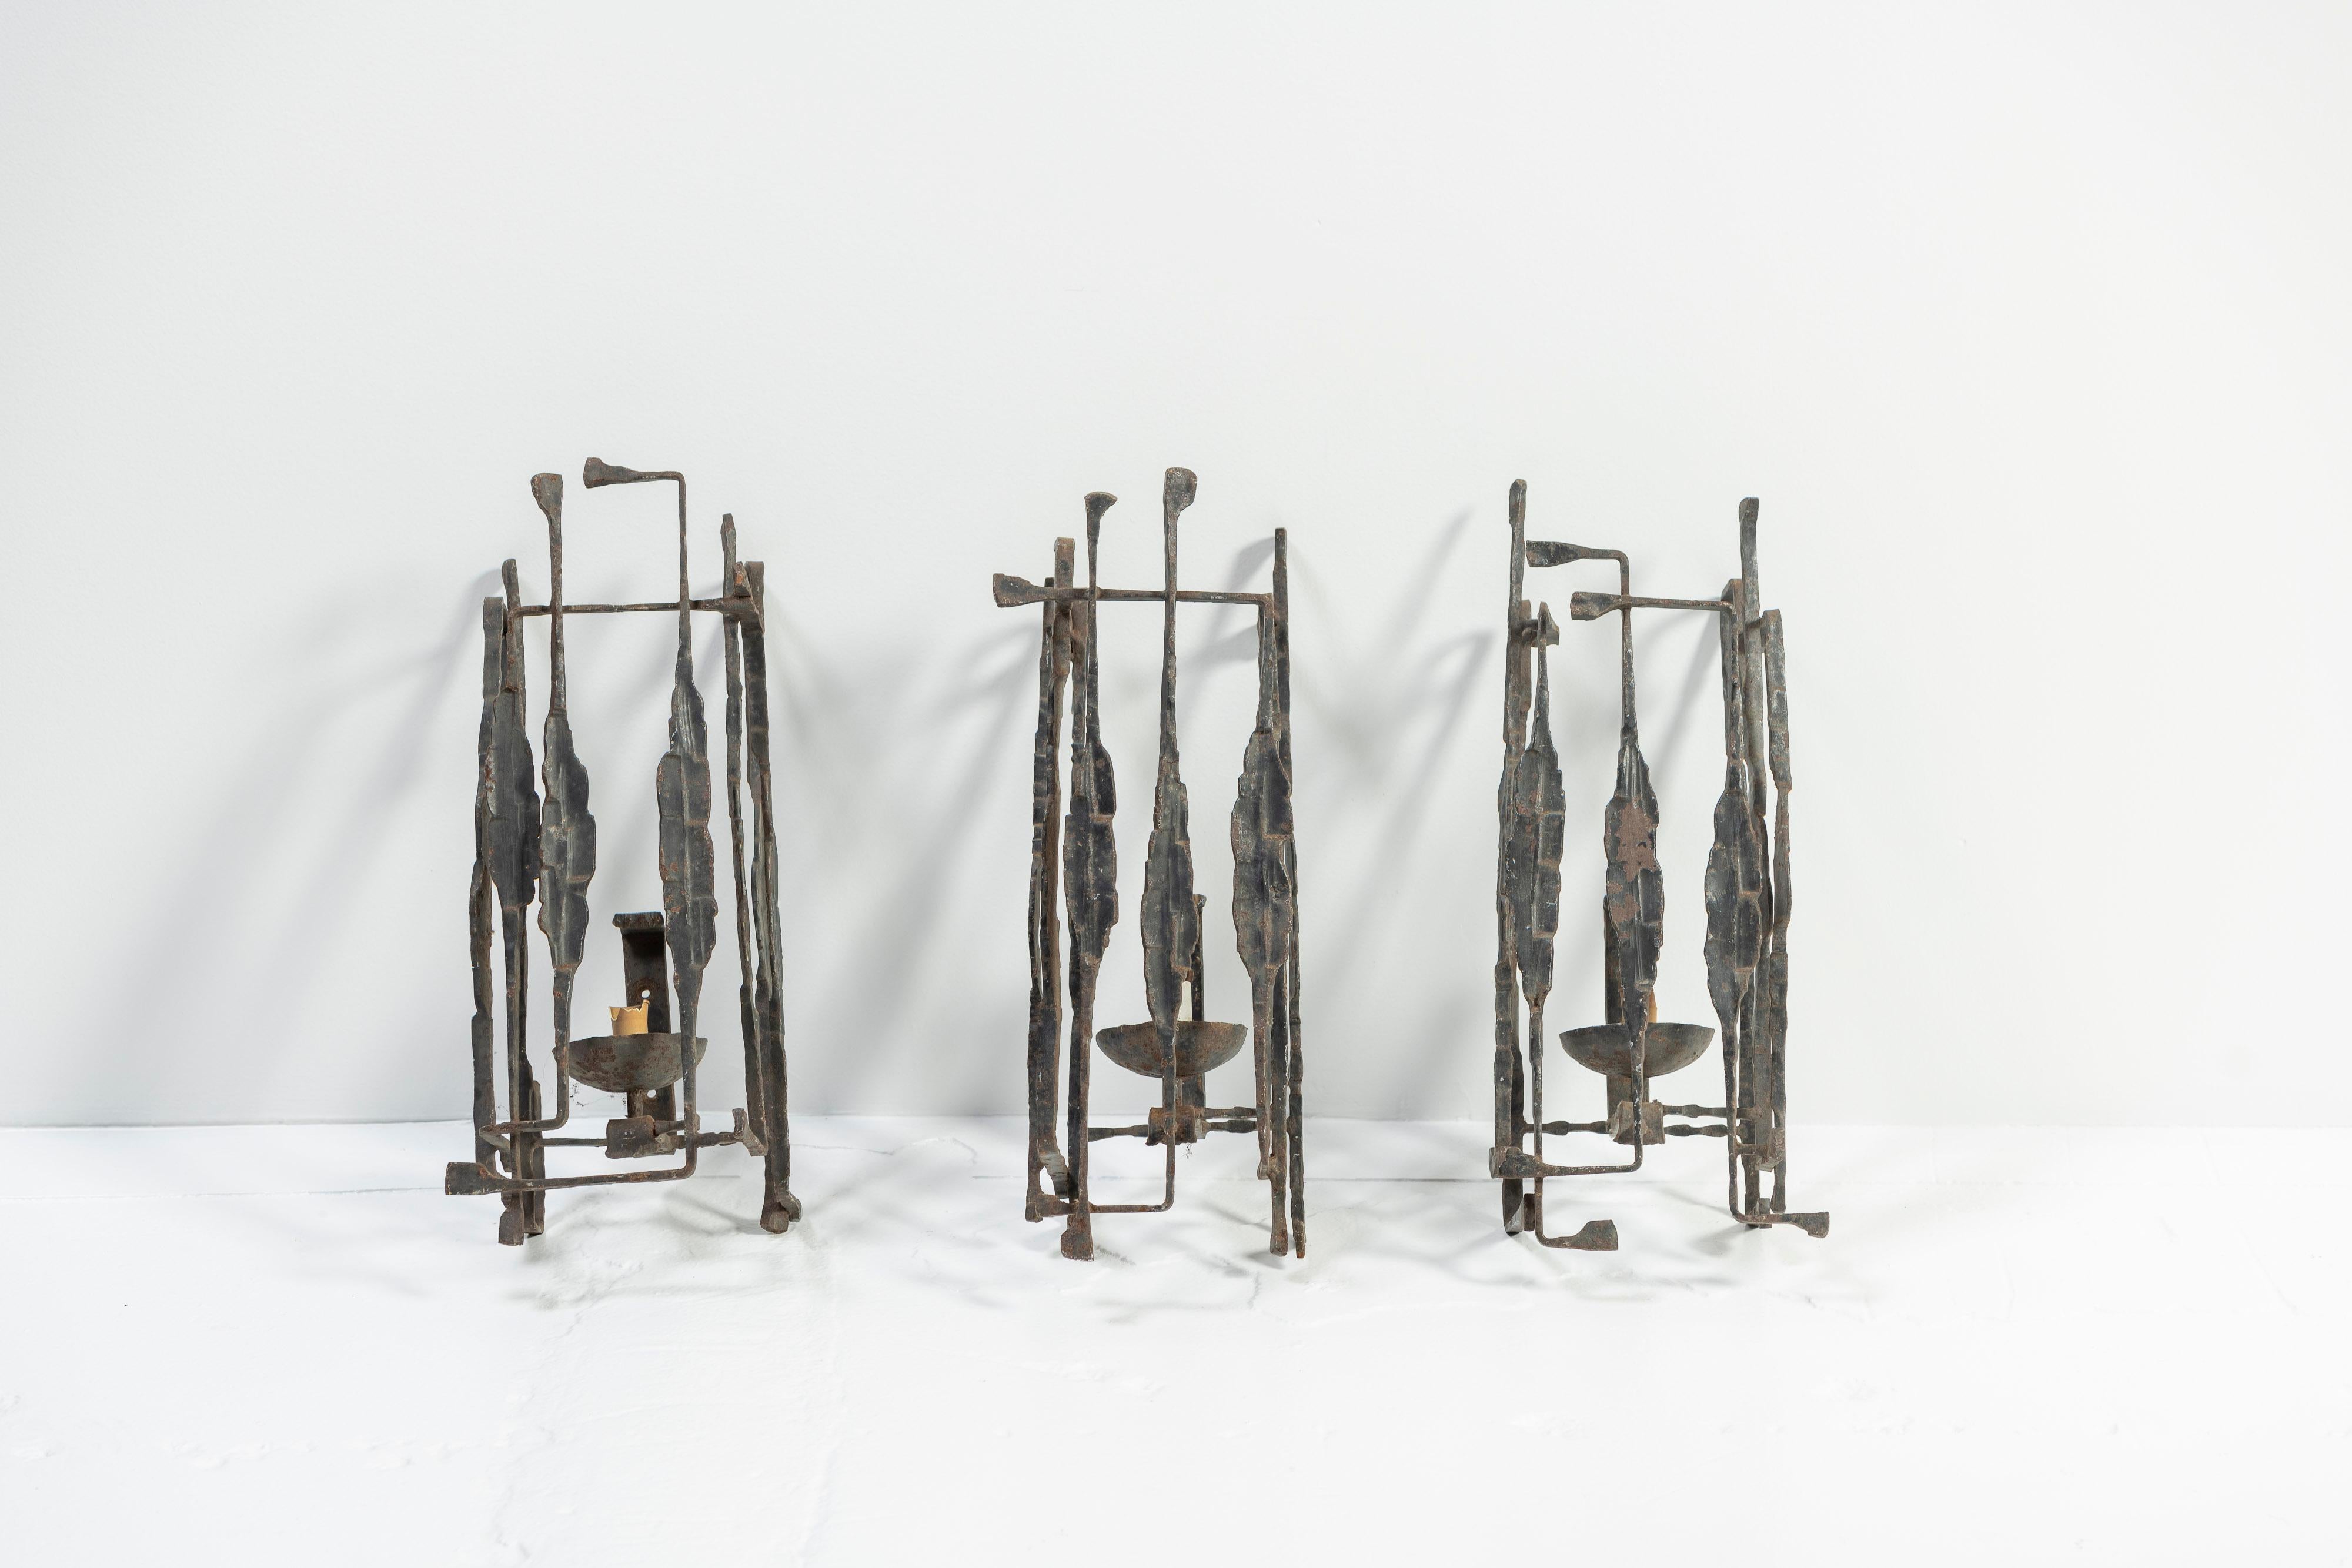 Five Vintage Brutalist Candle Sconces of Wrought Iron, Italian, 1970s For Sale 1